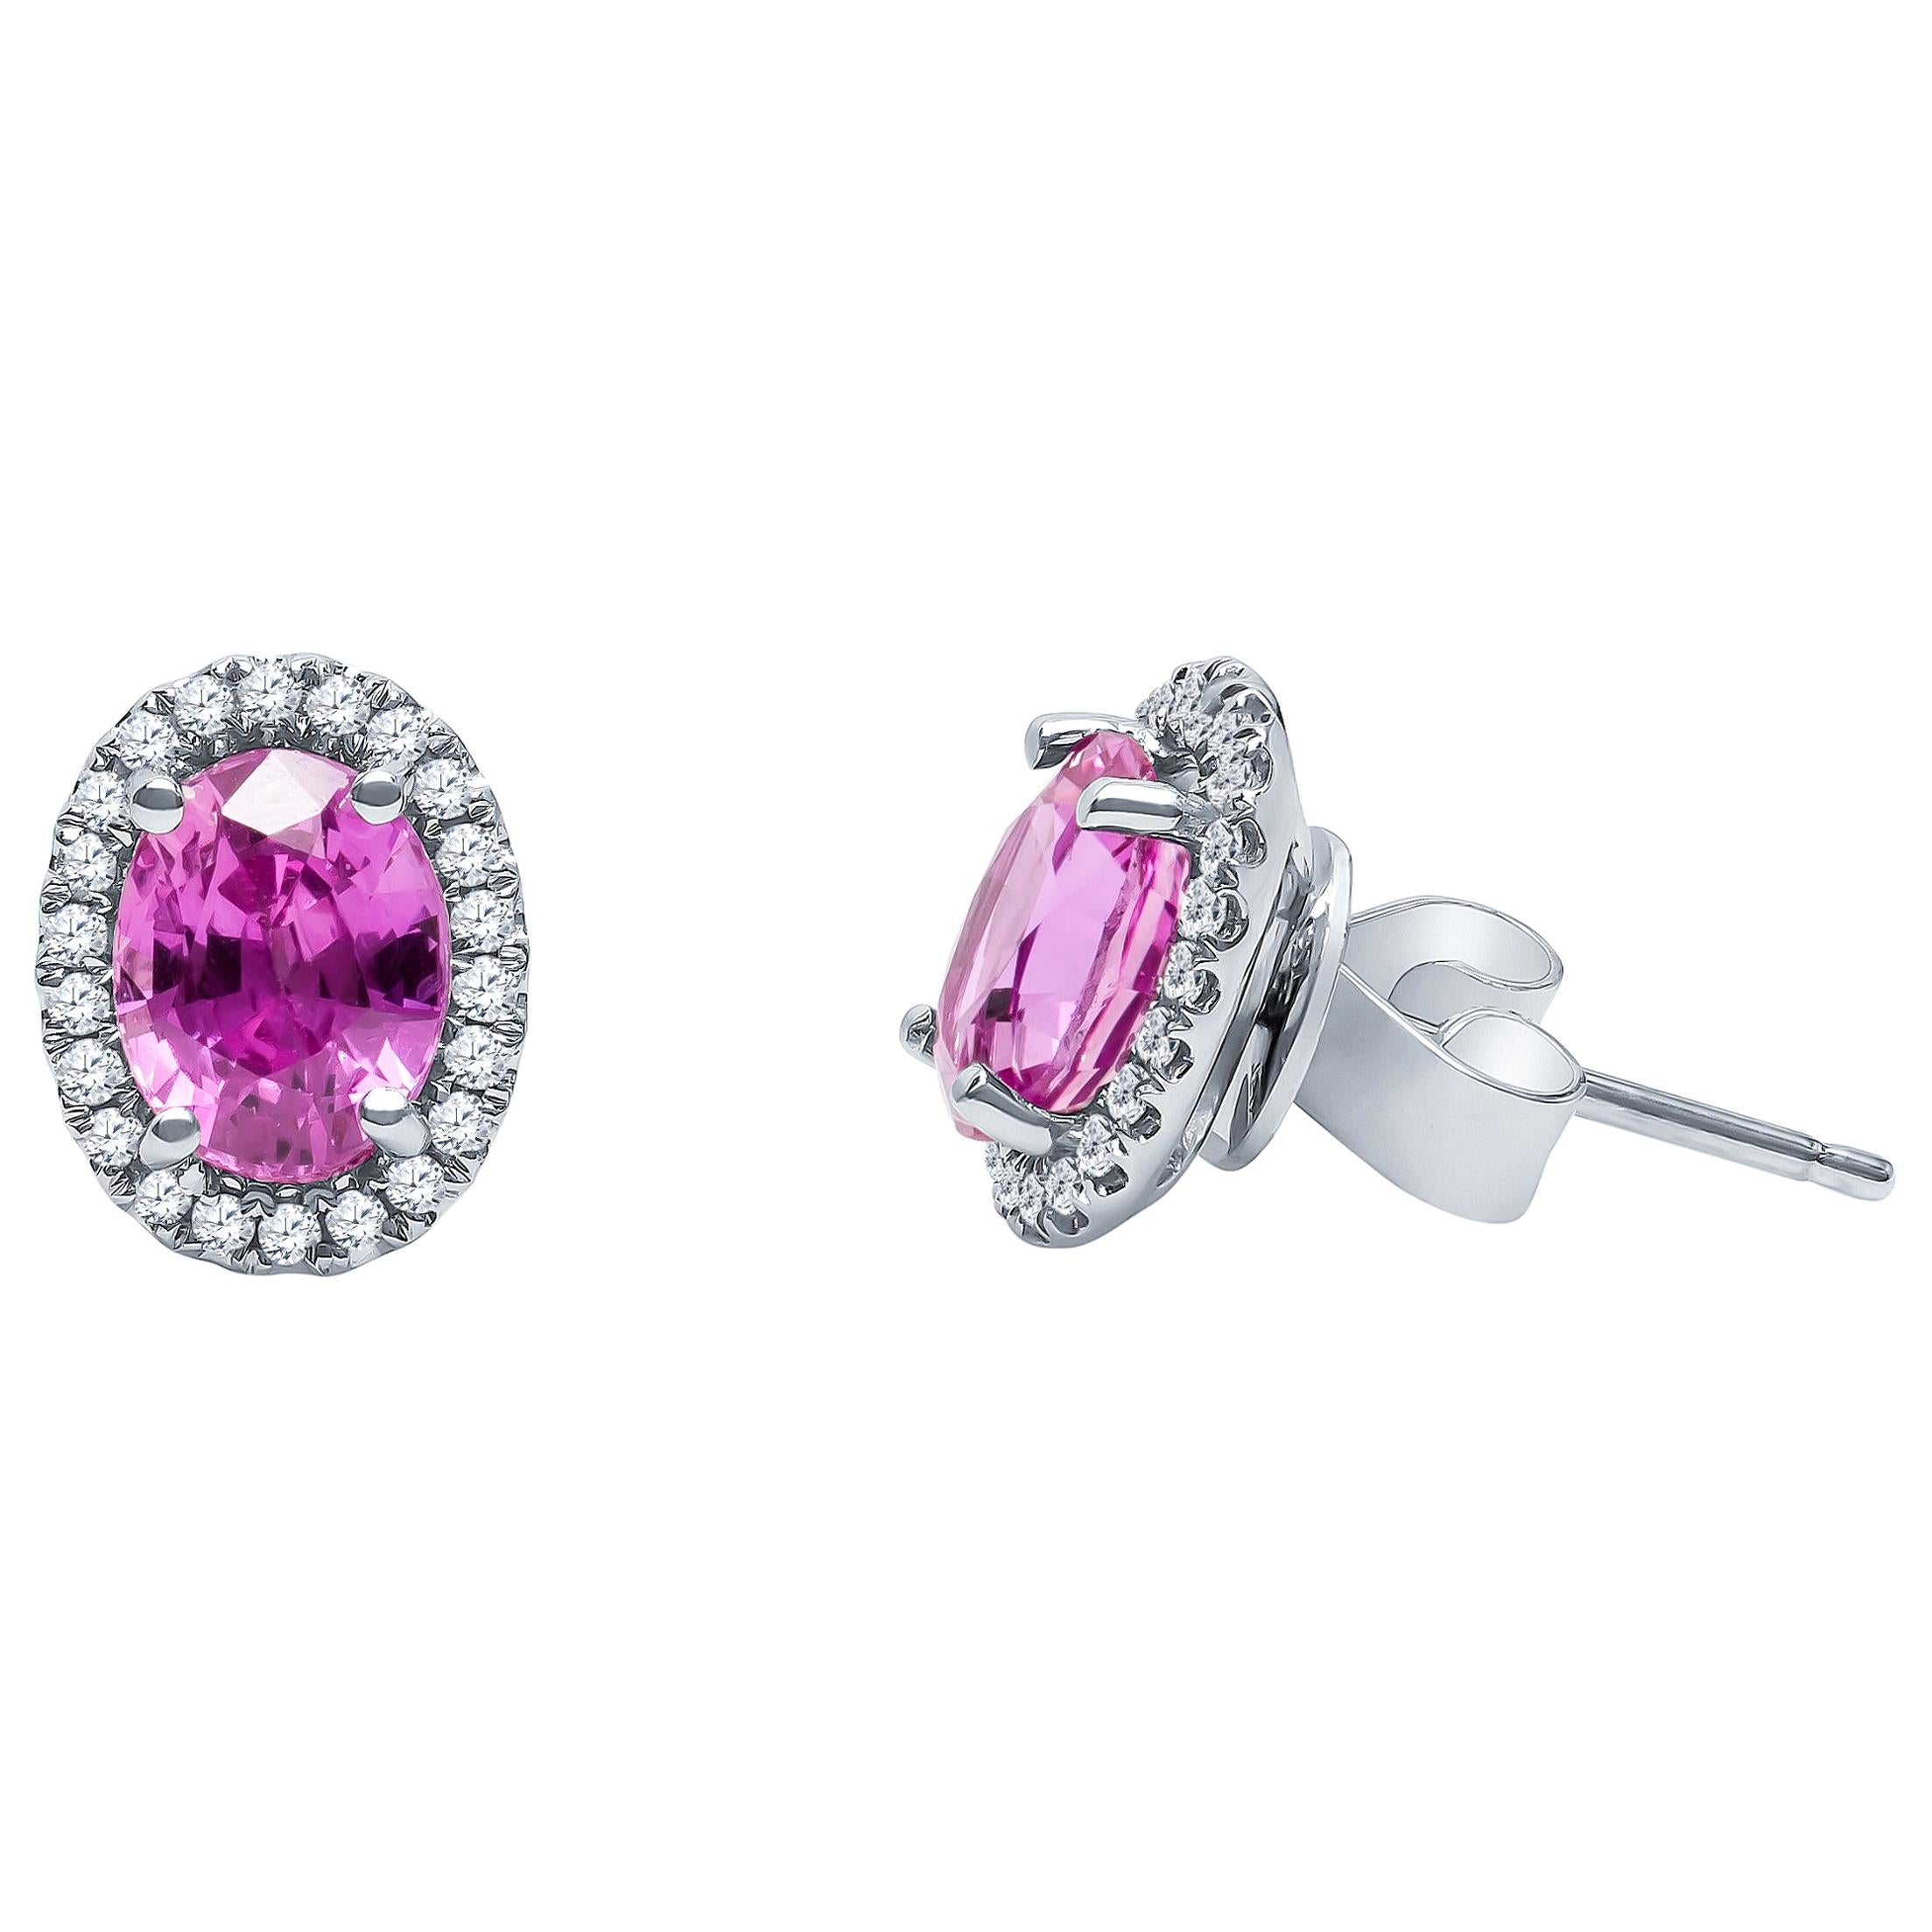 2.44 Carat Total Oval Natural Pink Sapphire Stud Earrings with Diamond Halos